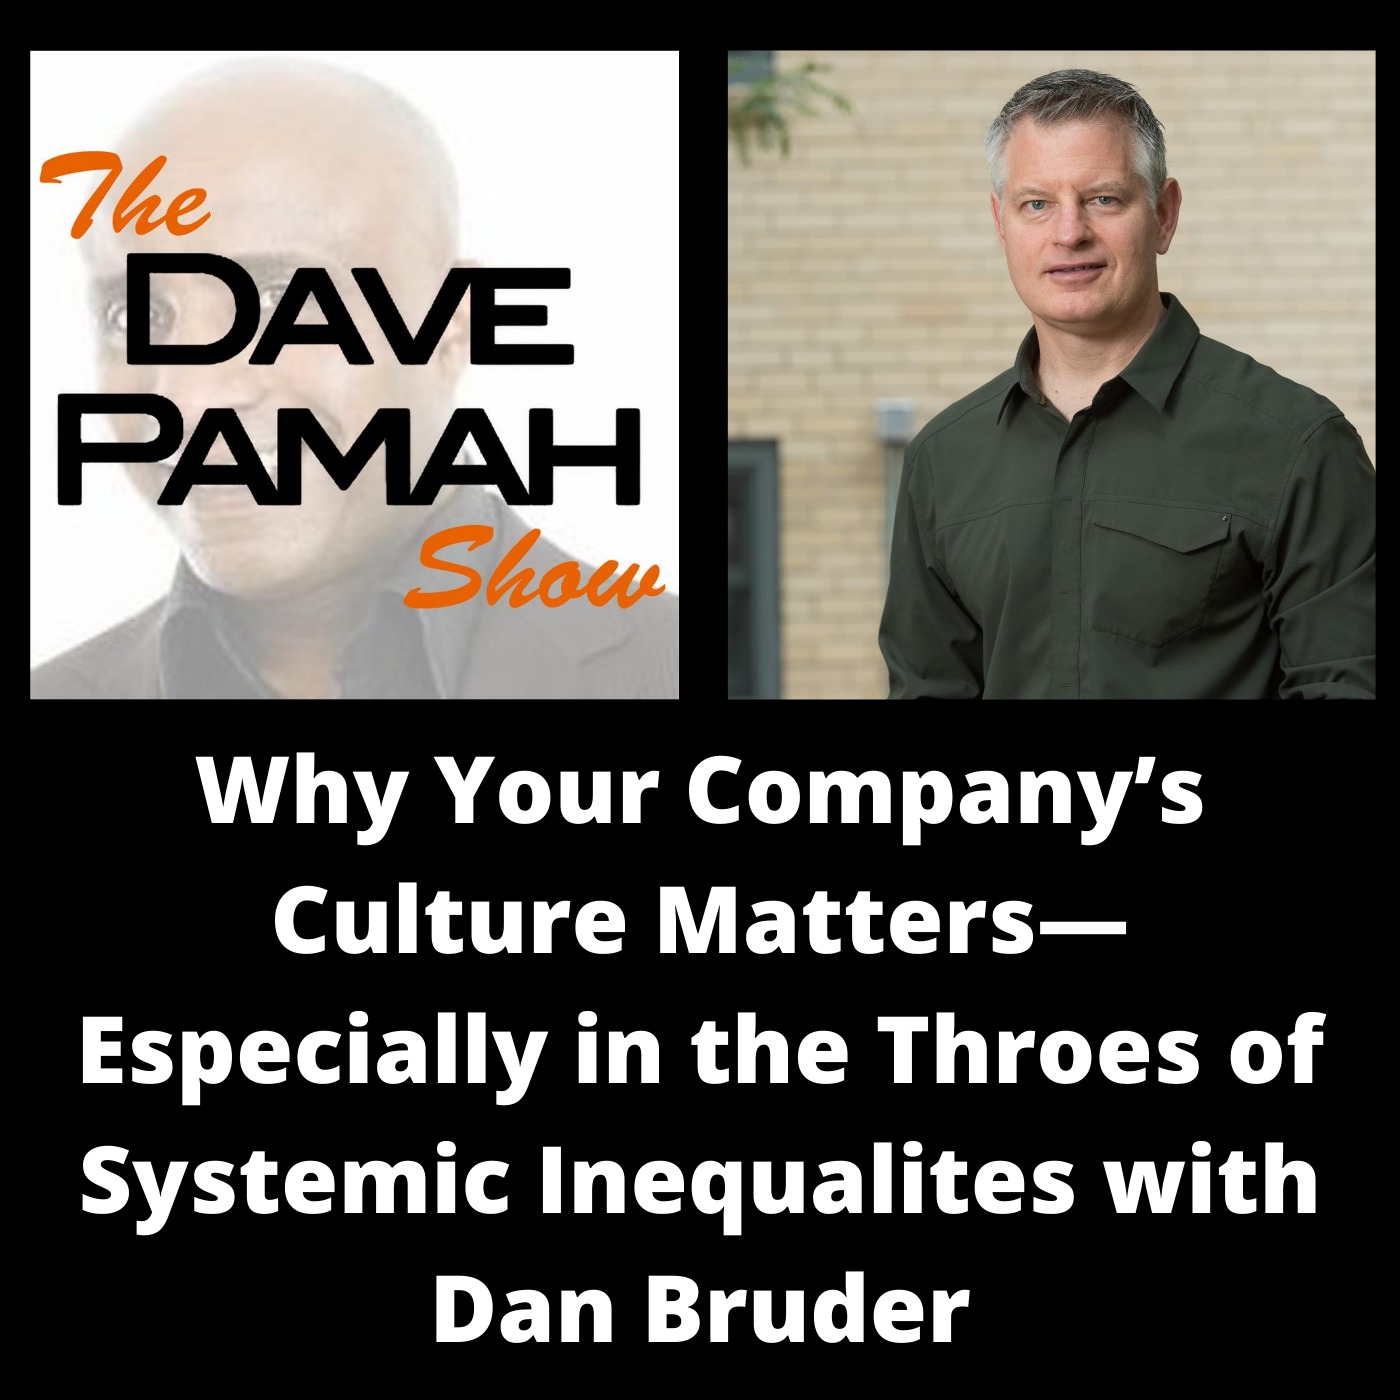 Why Your Company’s Culture Matters— Especially in the Throes of Systemic Inequalites with Dan Bruder